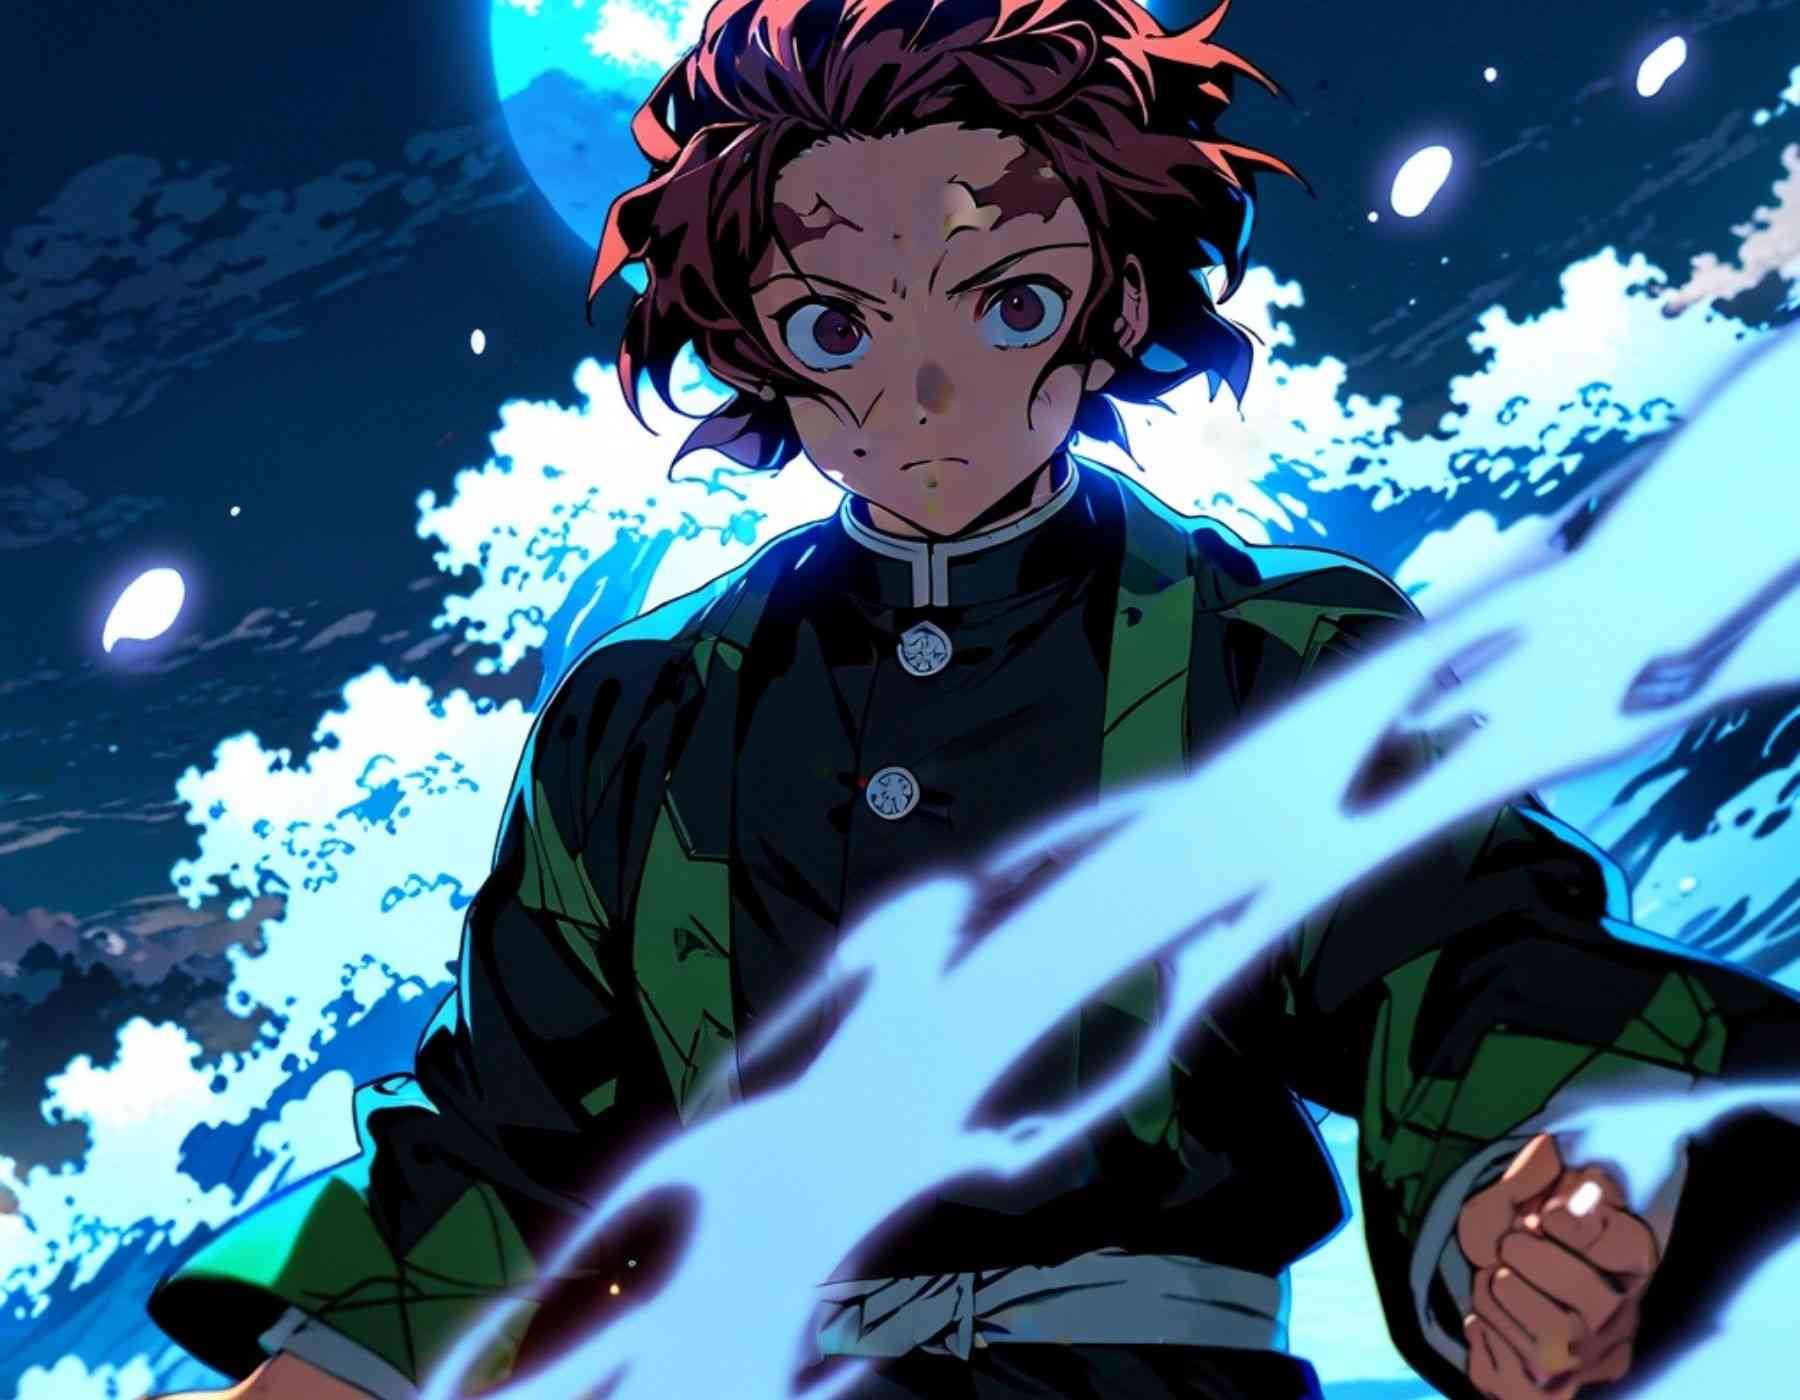 Tanjiro from demon slayer standing in a fierce pose, ready to battle. Vibrant colors and intense expression & tanjiro demon slayer wallpaper